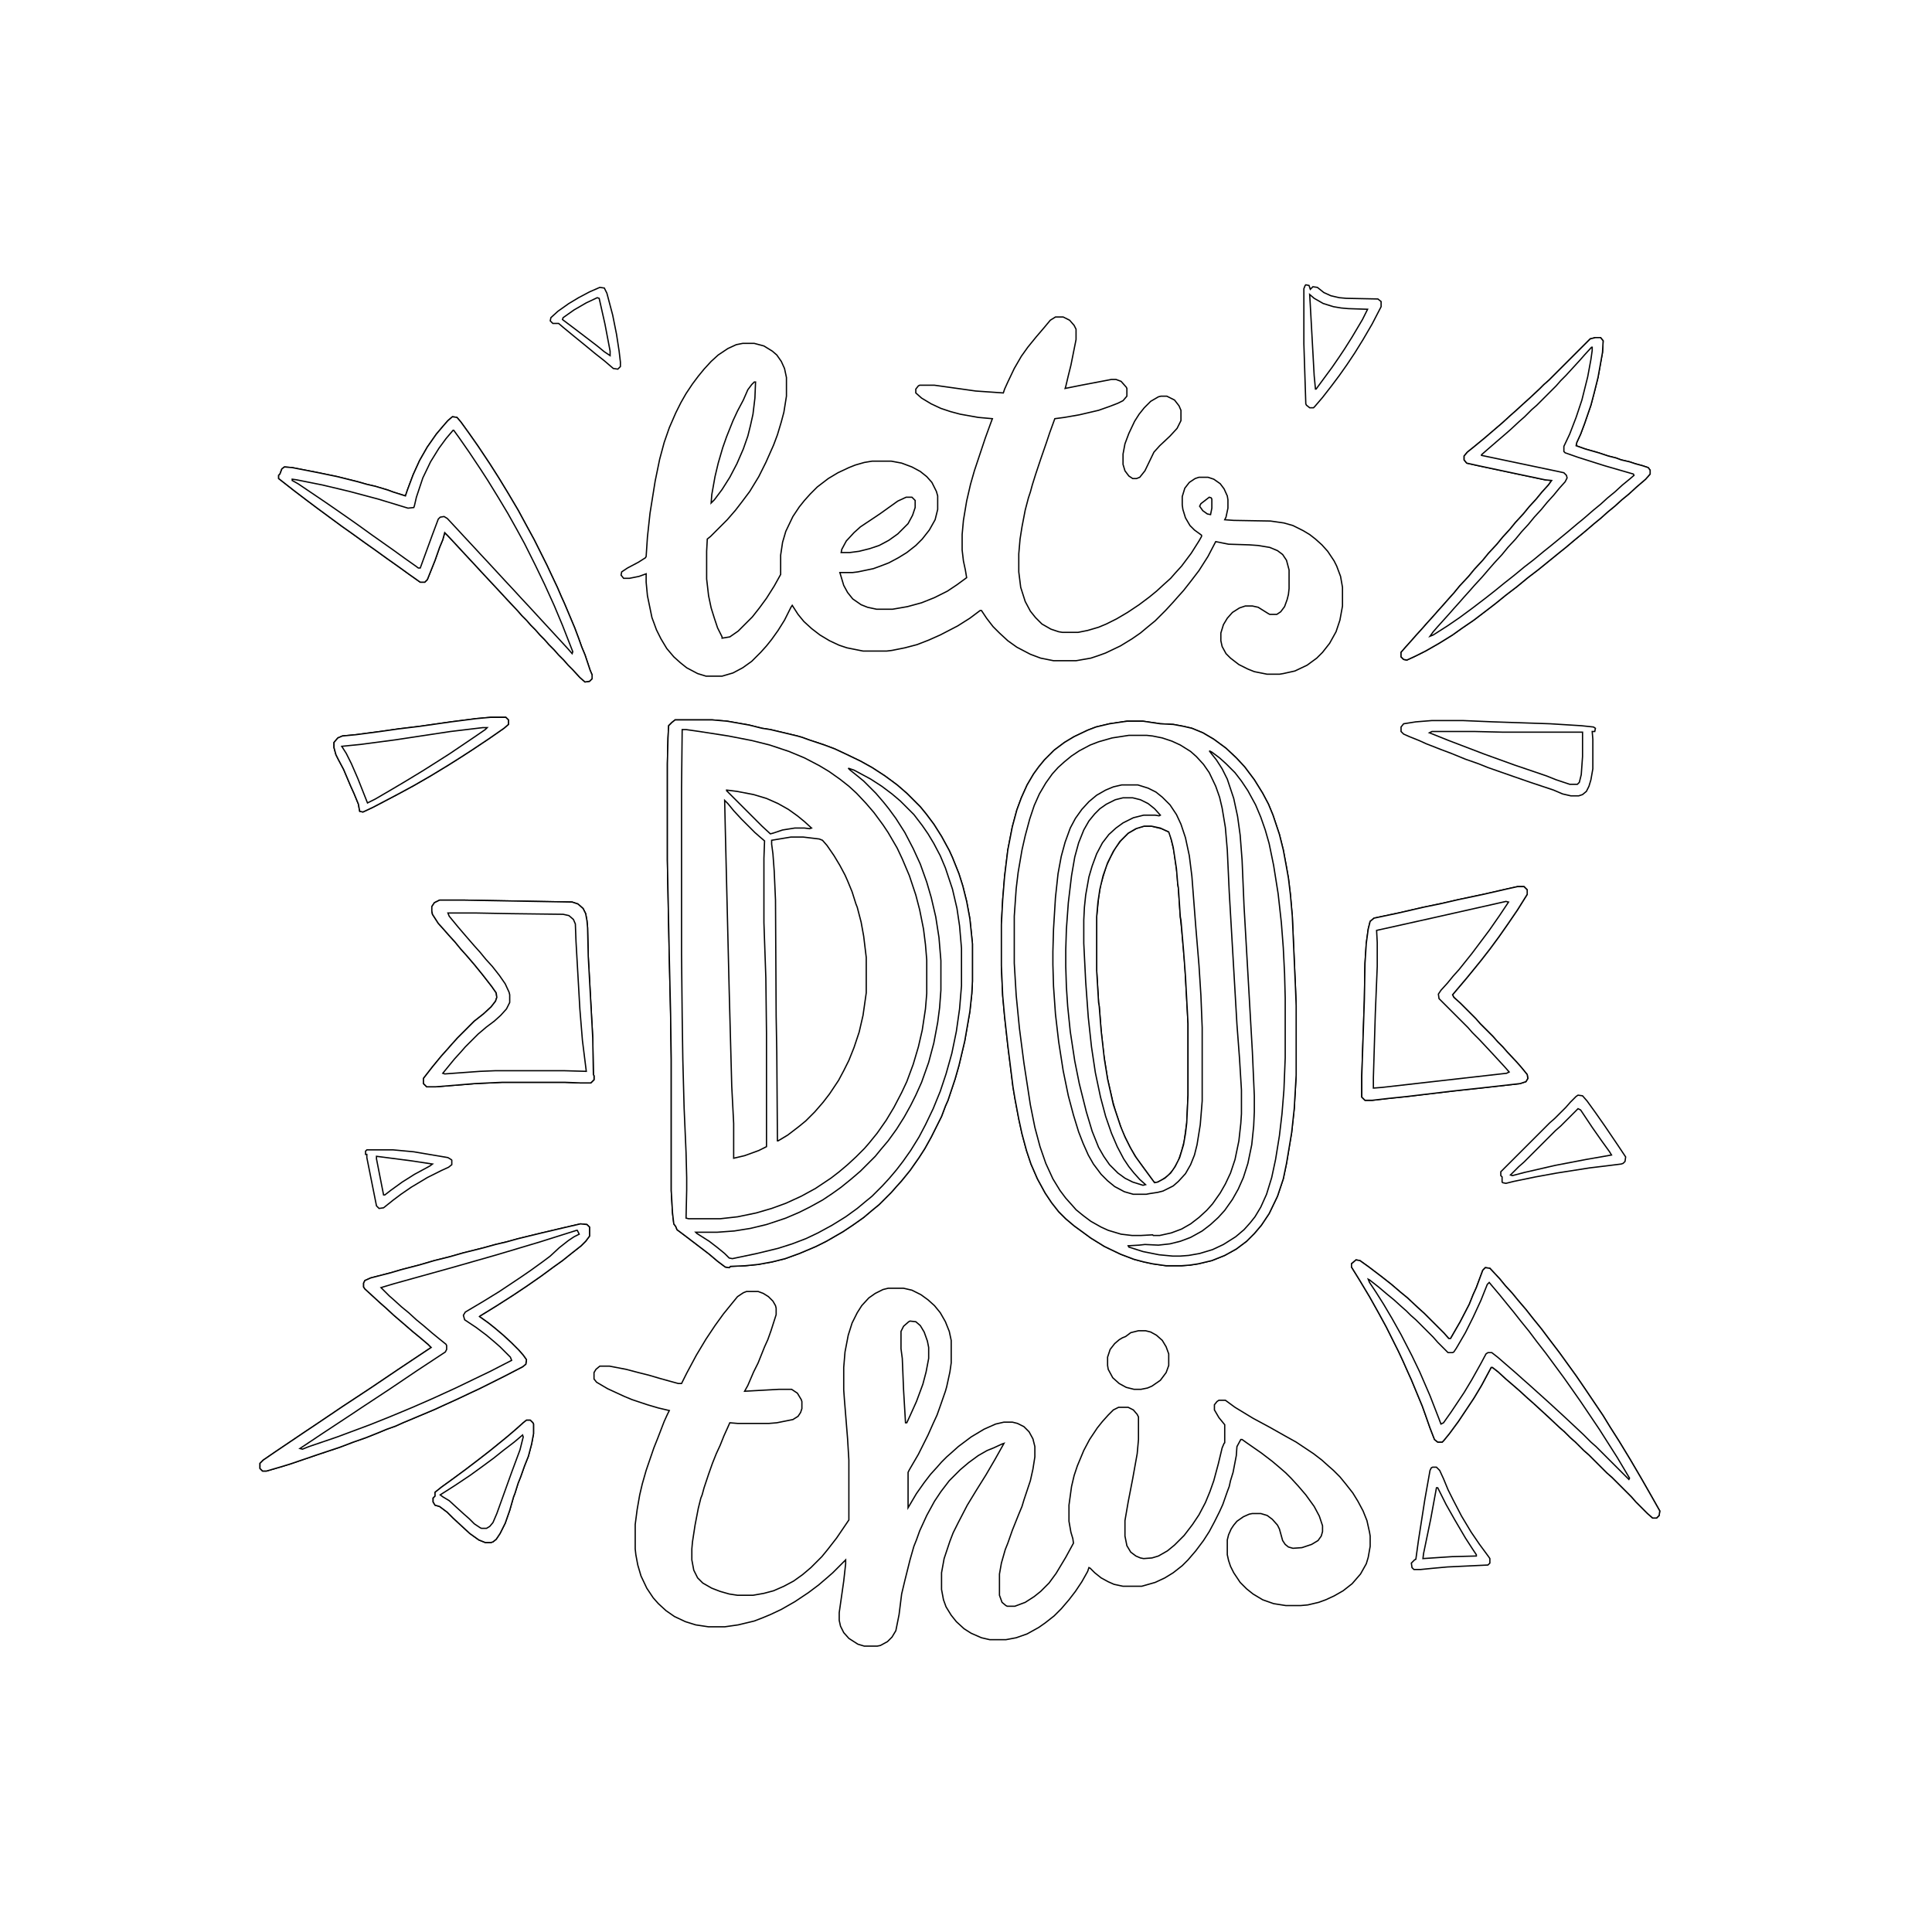 Lets Do This - Coloring page